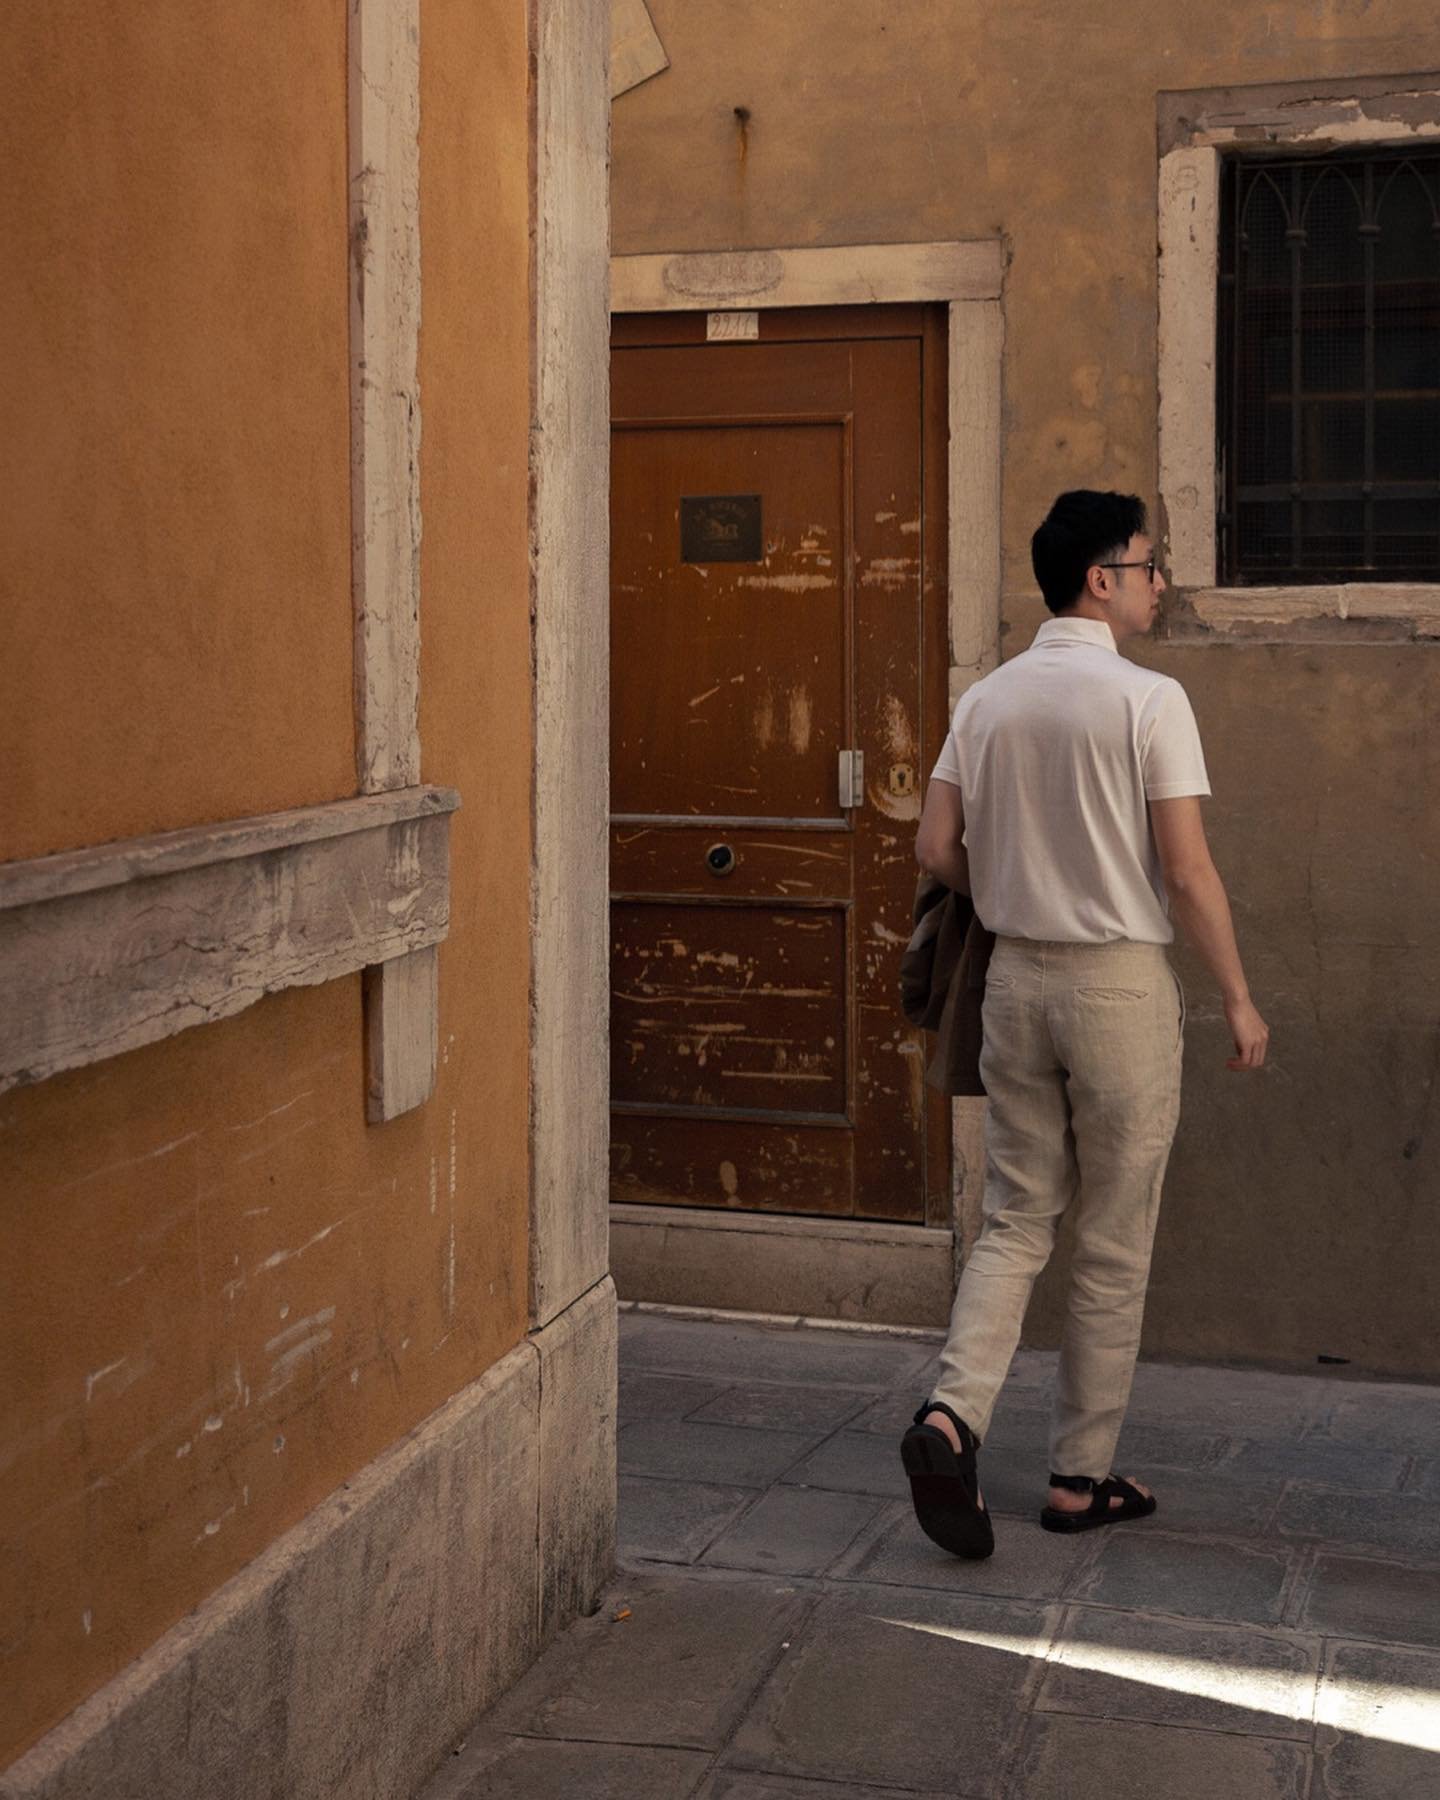 Meet me in Venezia
@lucafaloni 
___
AD/ In partnership with Luca Faloni, the concluding two part mini-series in Venice &mdash; I&rsquo;m wearing their luxuriously breathable silk cotton polo, paired with relaxed linen trousers for an effortless look 